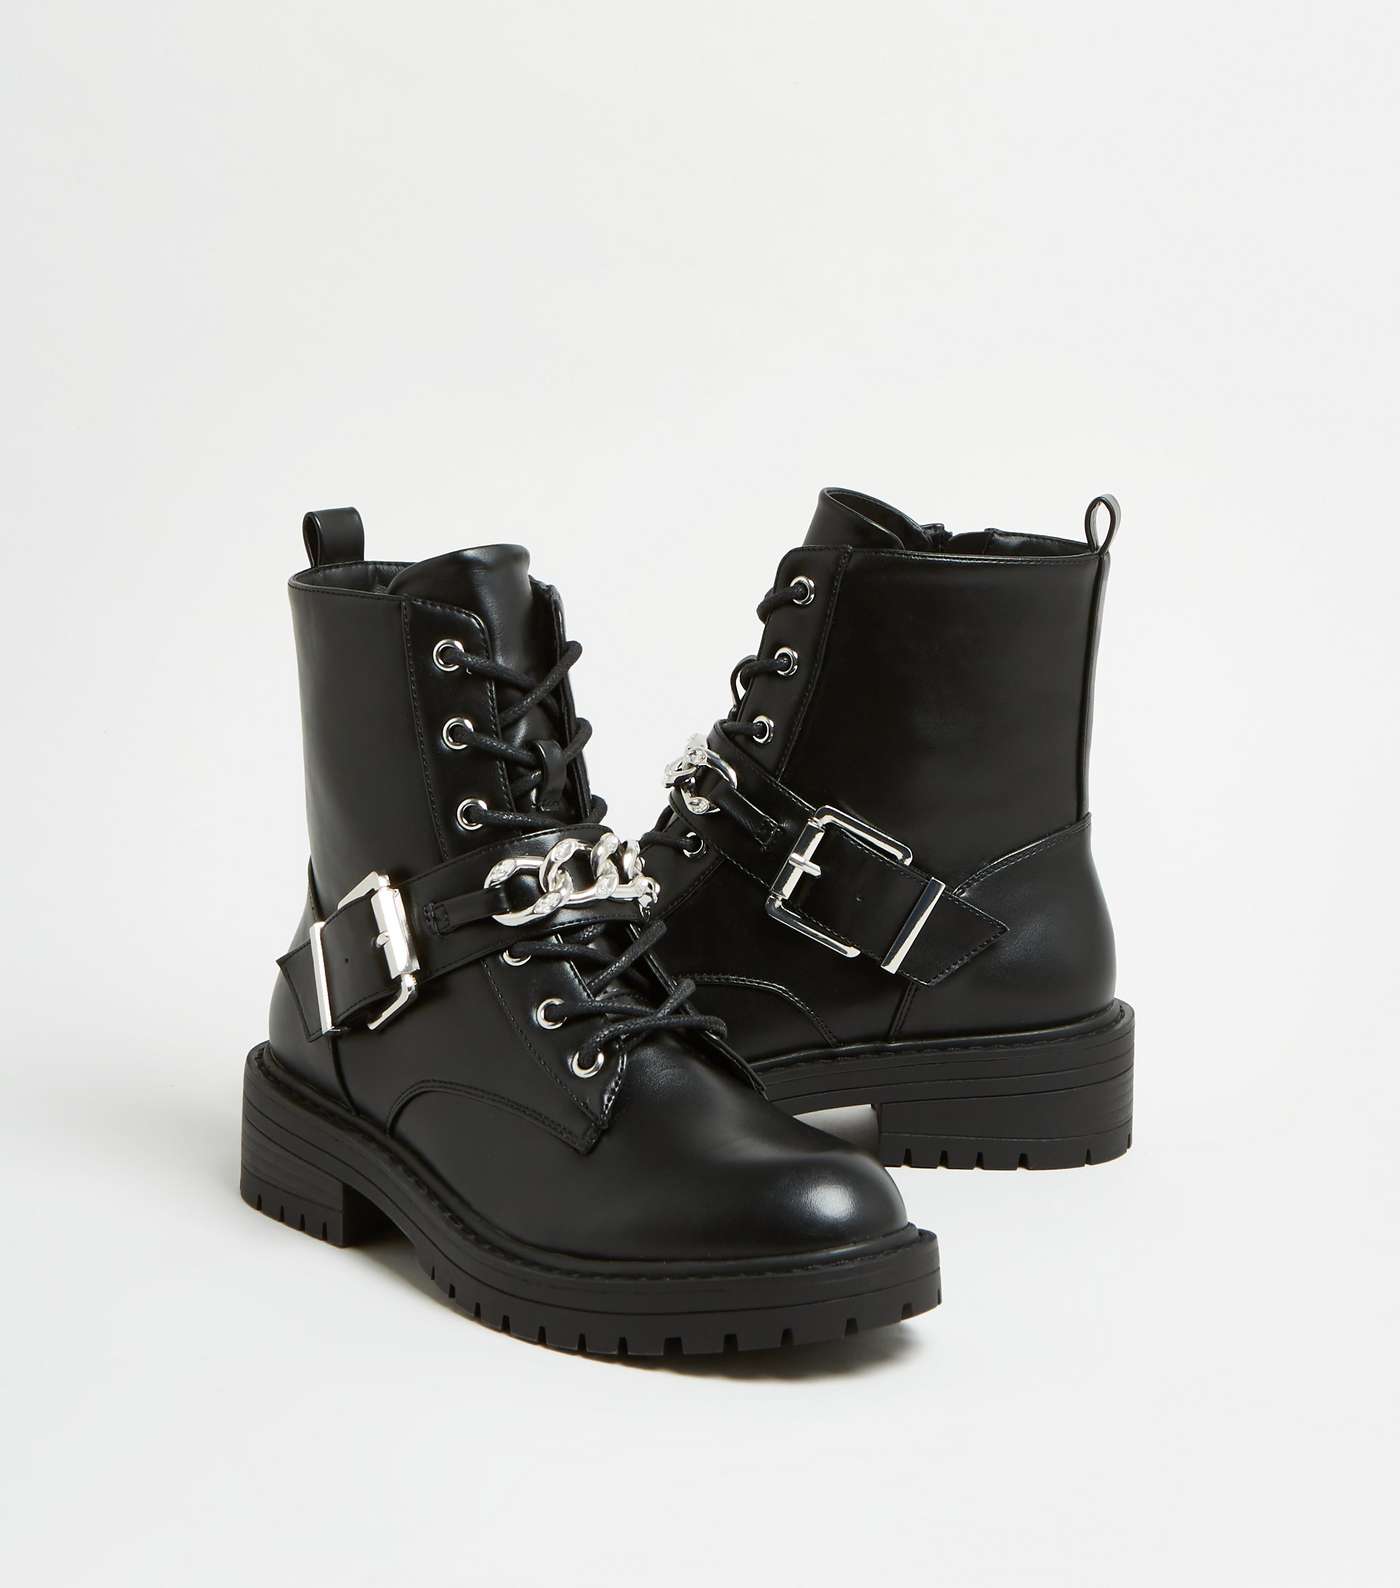 Black Chain and Buckle Lace Up Biker Boots Image 2